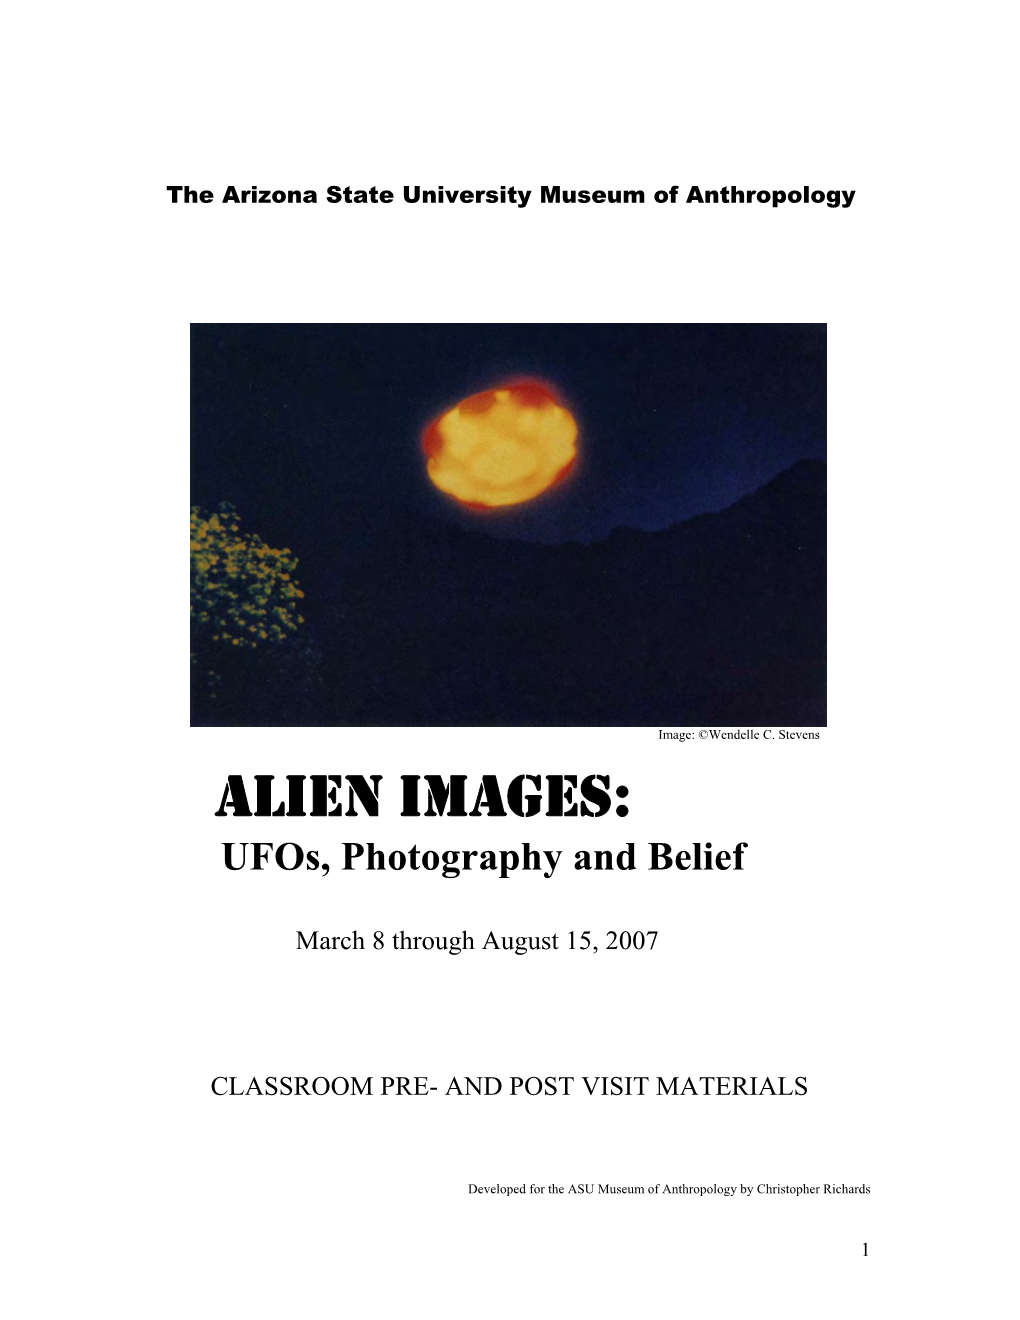 ALIEN IMAGES: Ufos, Photography and Belief